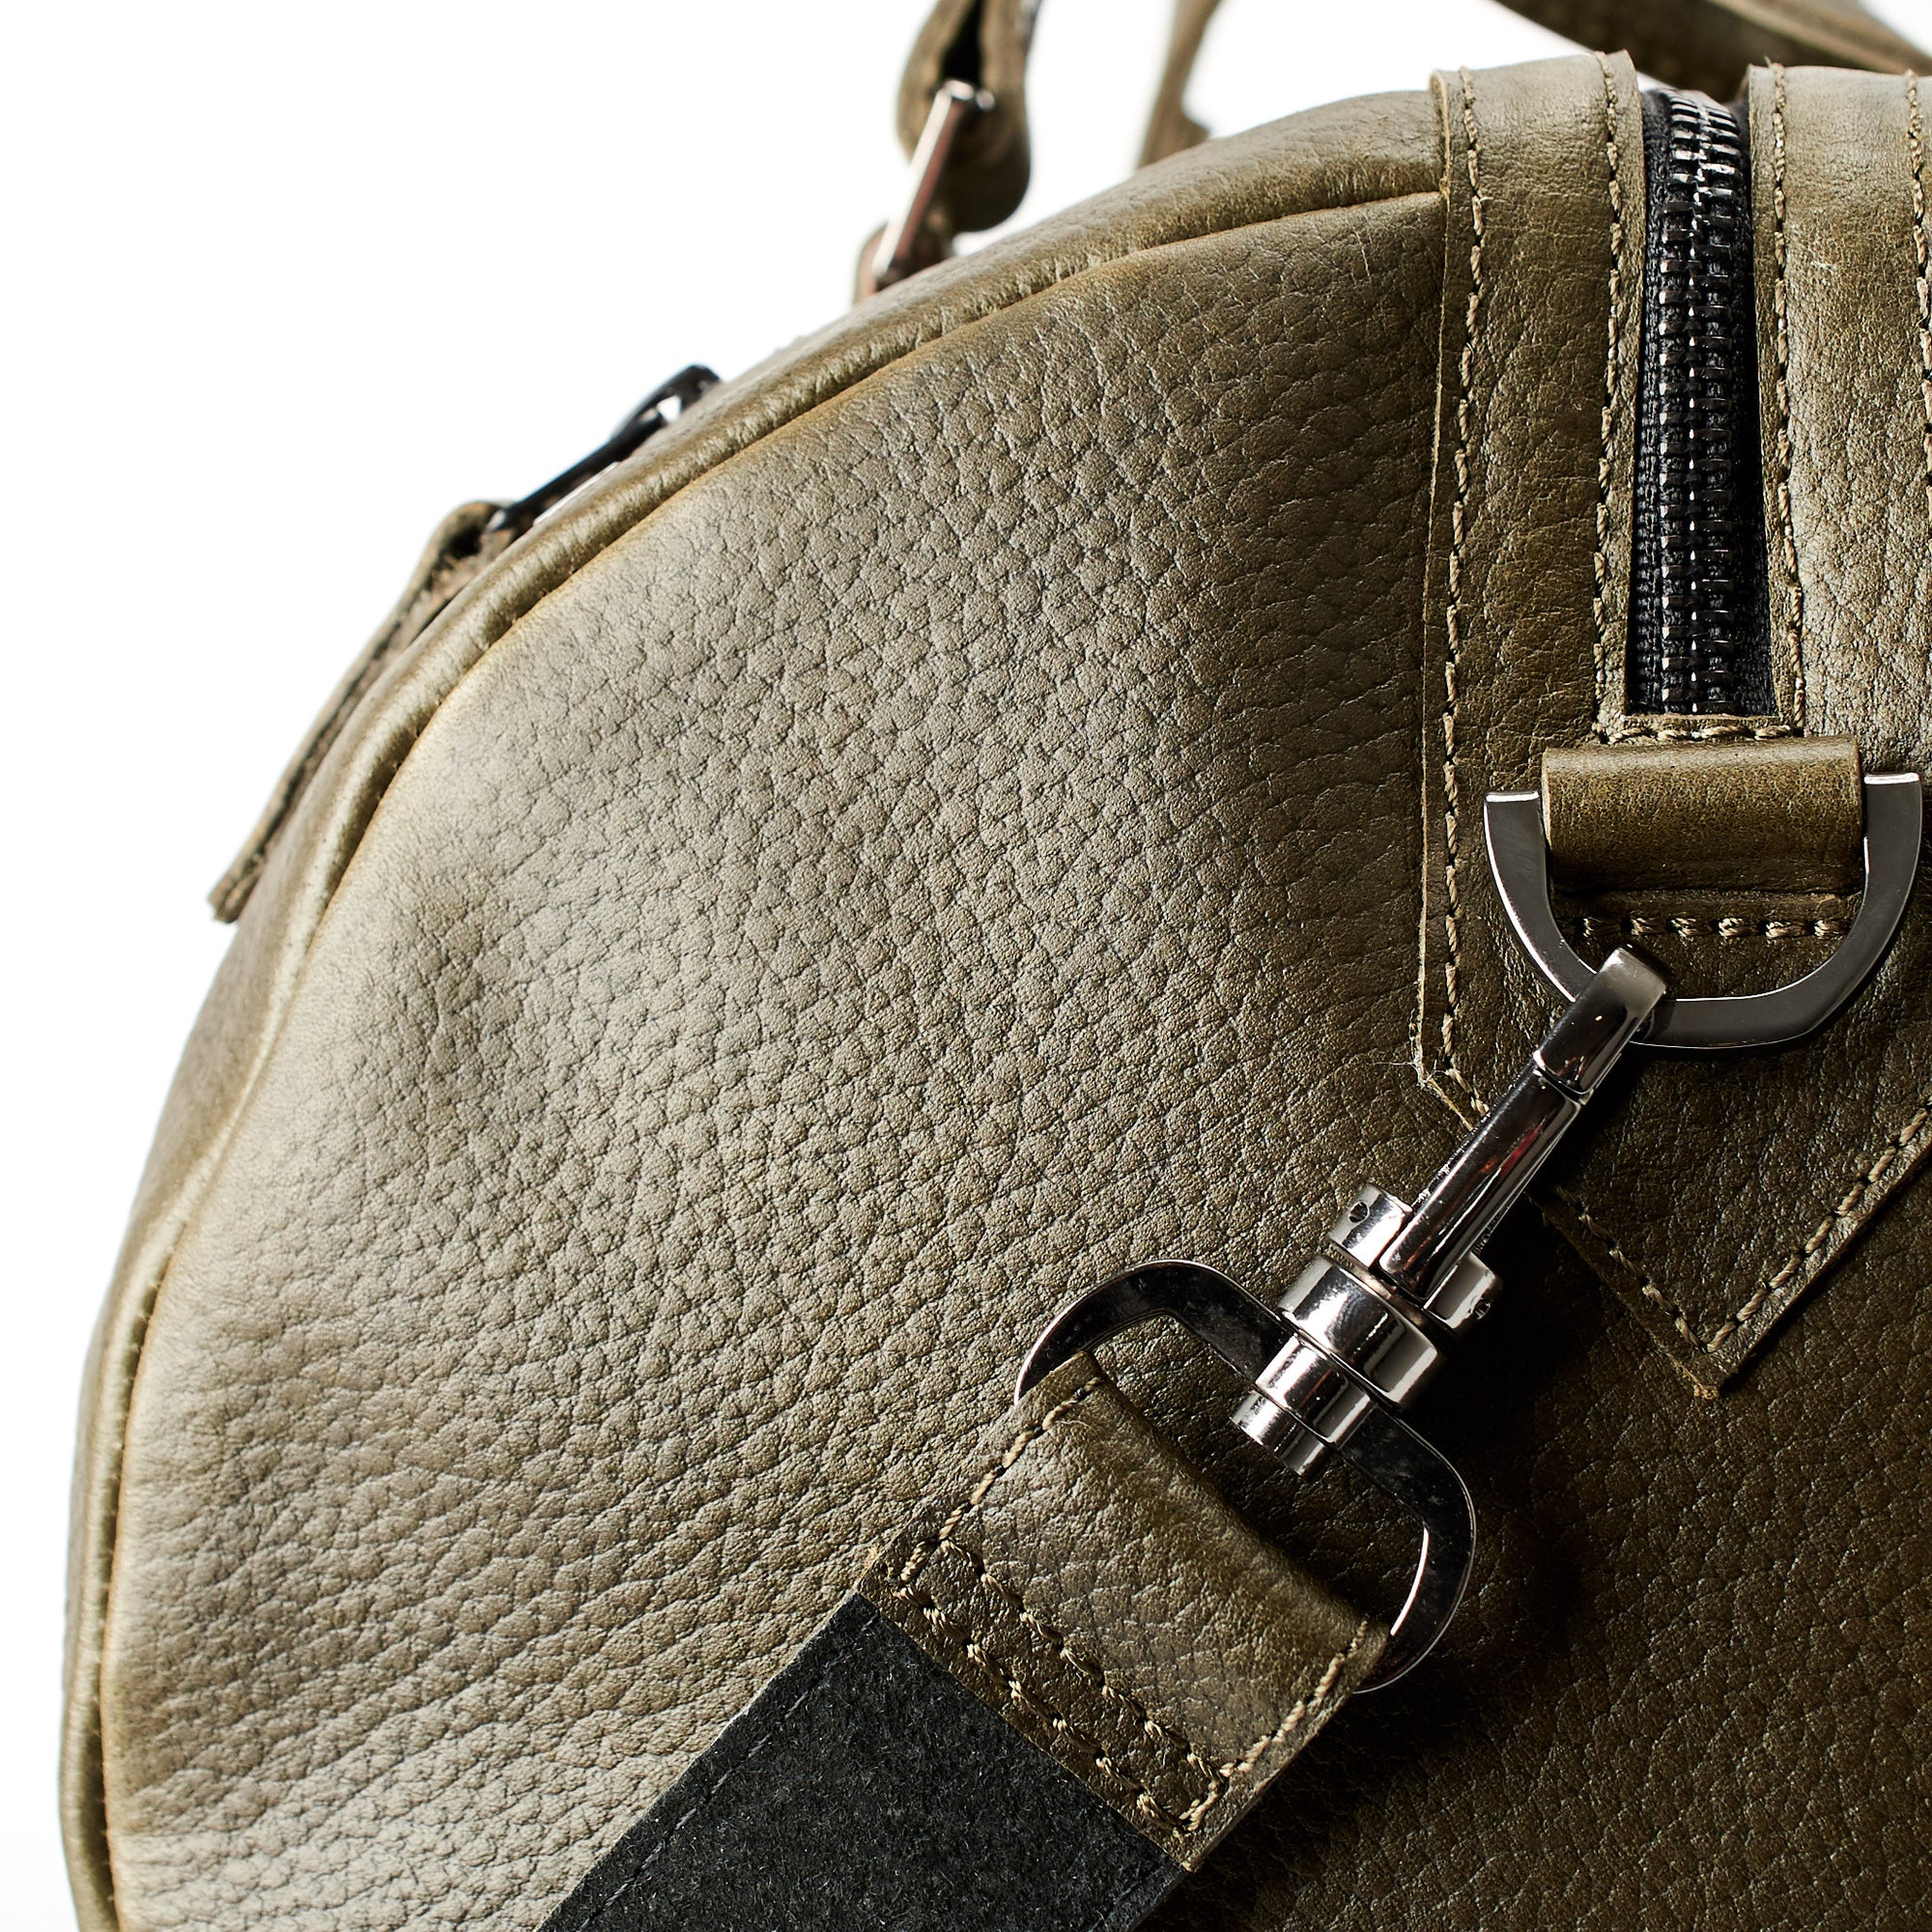 Suede detail. Green  leather shoulder bag for mens gifts. Work out duffle bag